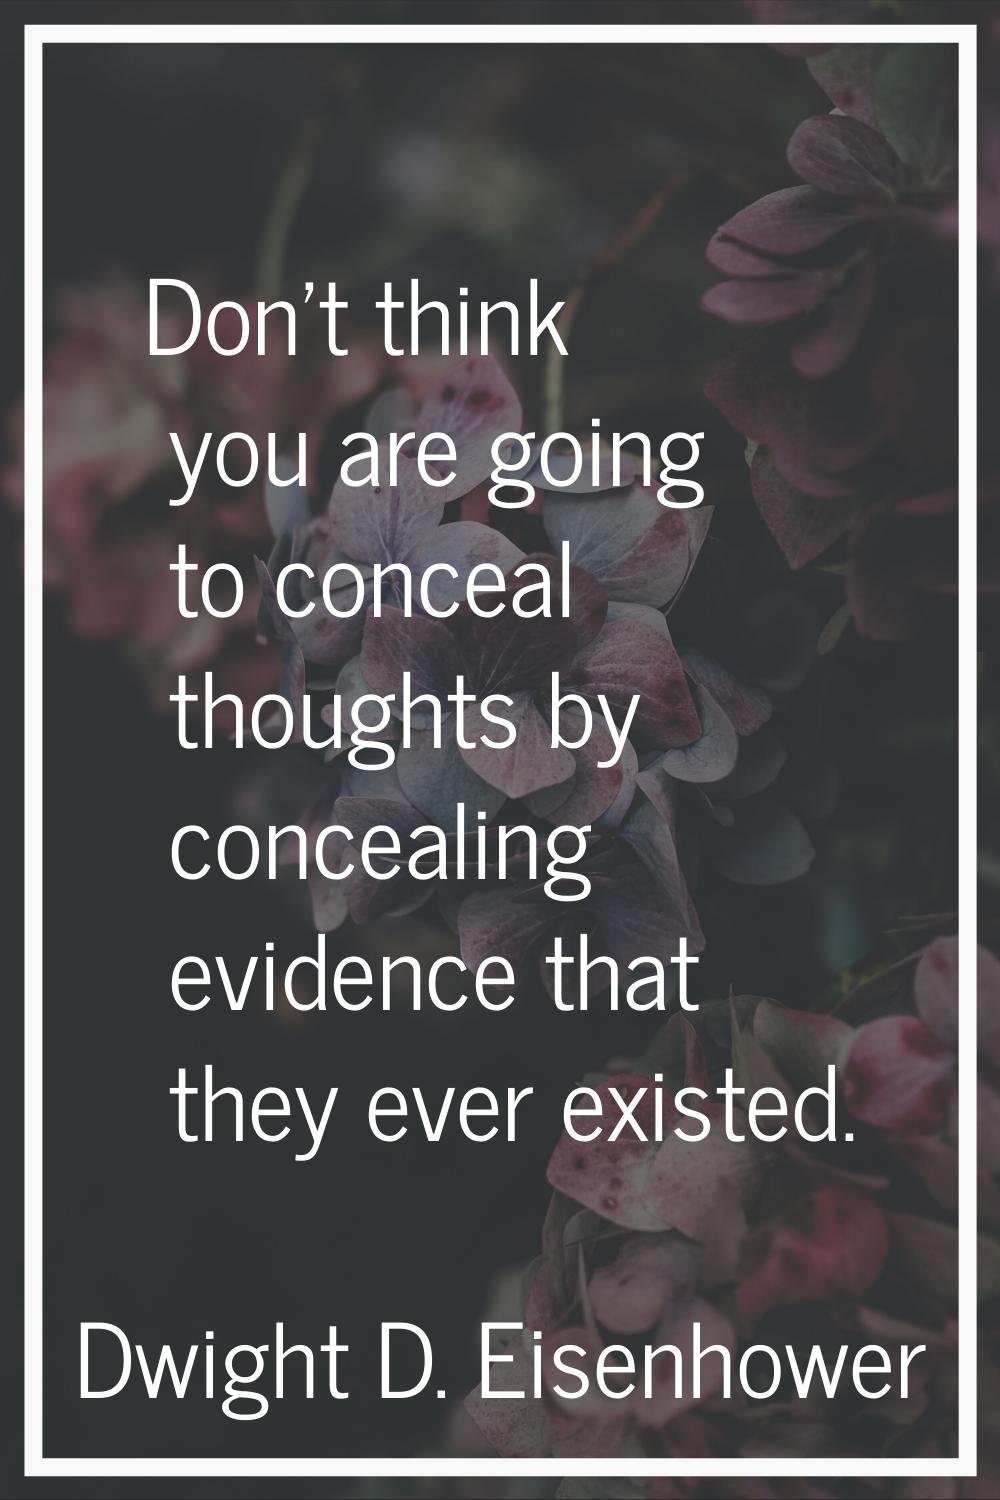 Don't think you are going to conceal thoughts by concealing evidence that they ever existed.